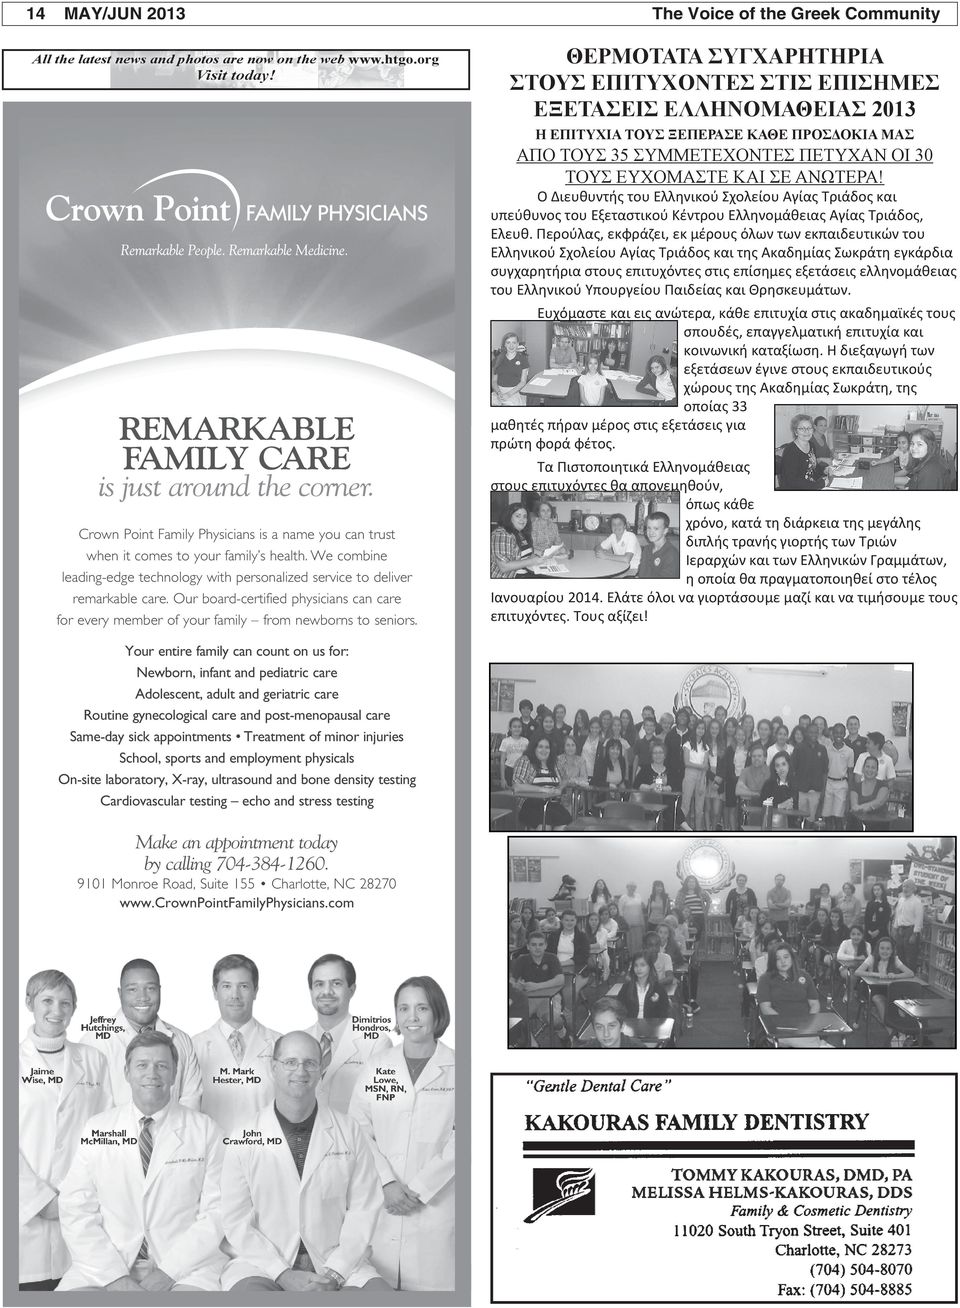 REMARKABLE FAMILY CARE is just around the corner. Crown Point Family Physicians is a name you can trust when it comes to your family s health.